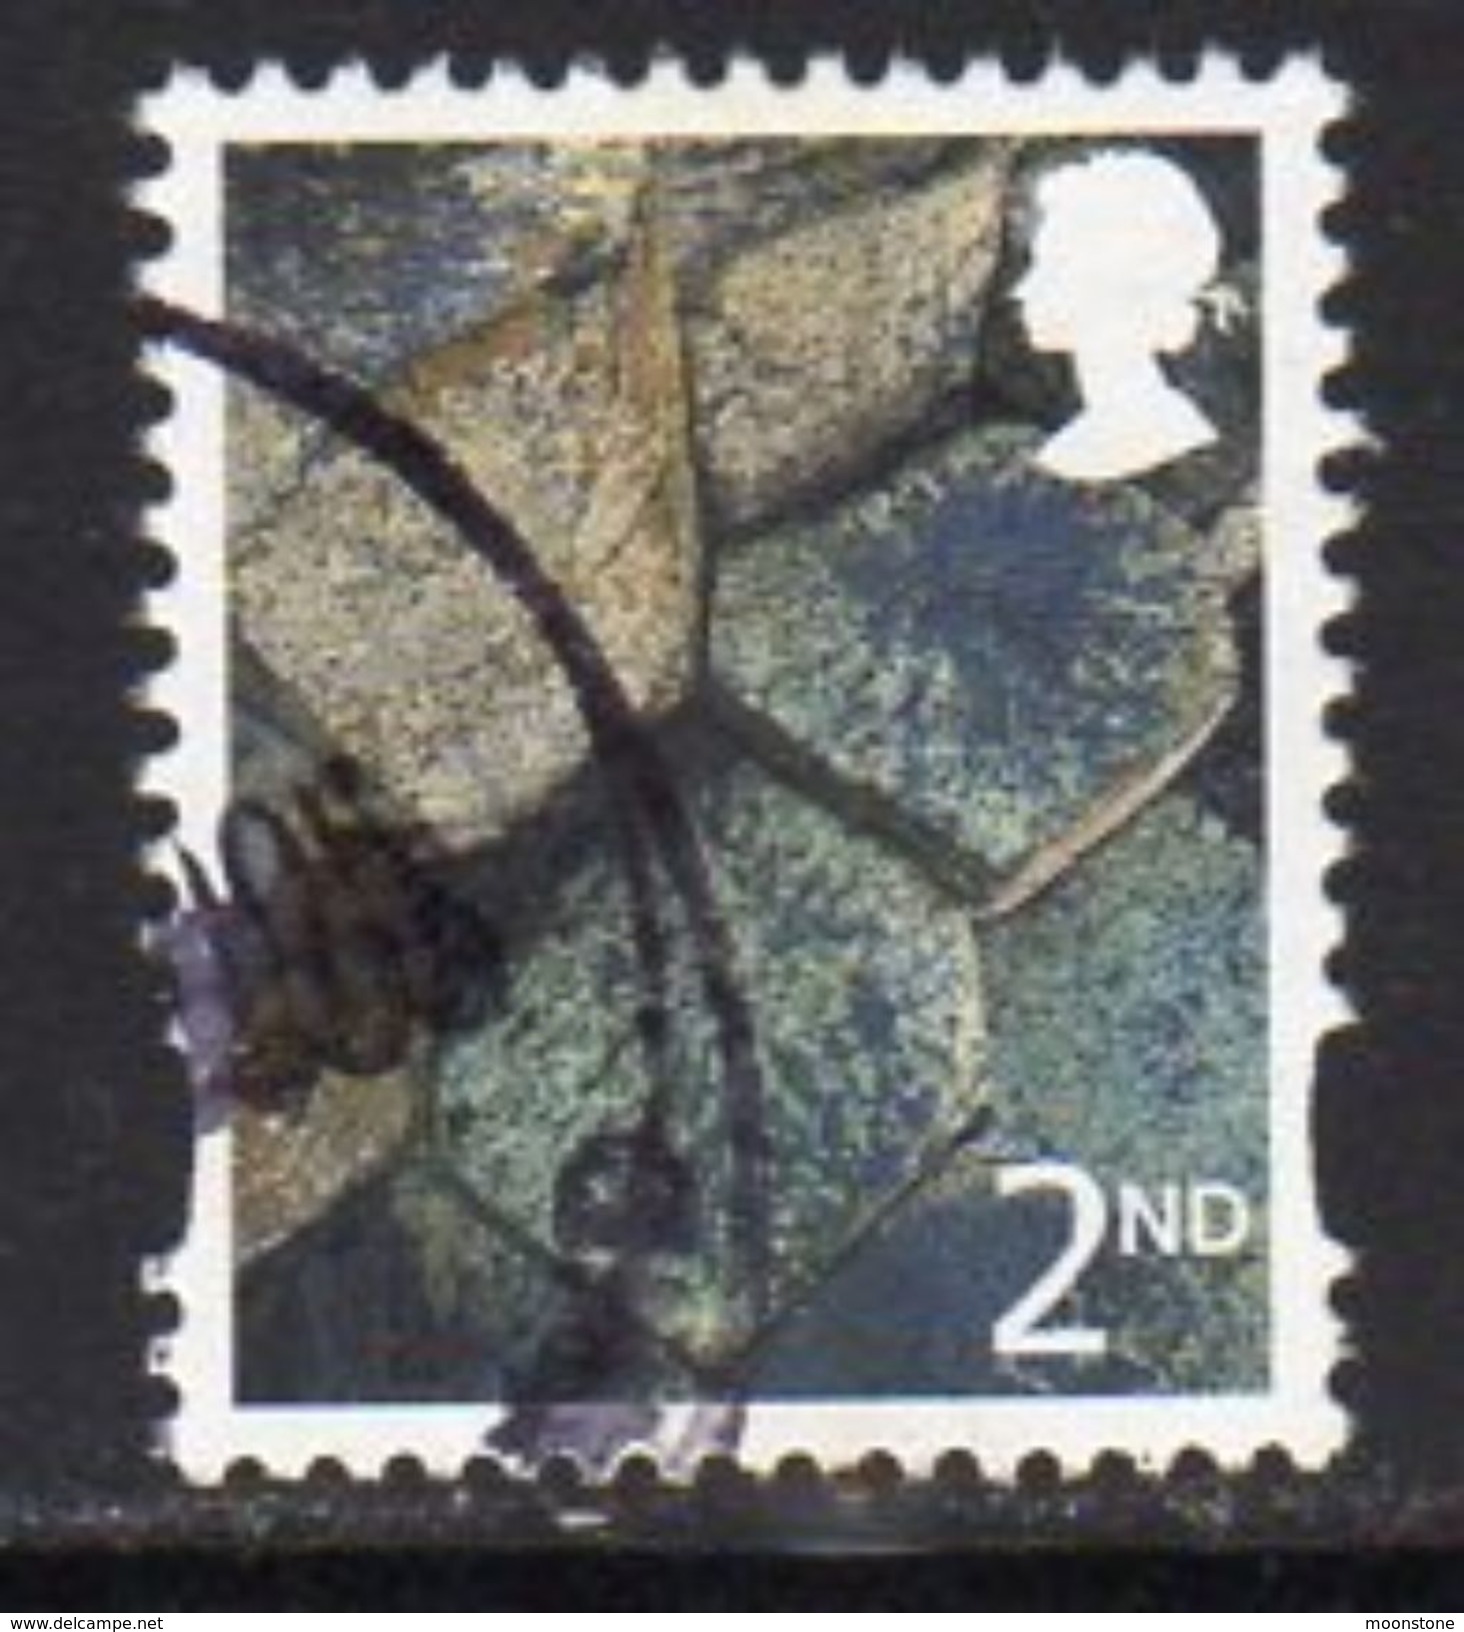 GB N. Ireland 2003-17 2nd Class With Border Regional Country, Used, SG 94 - Northern Ireland